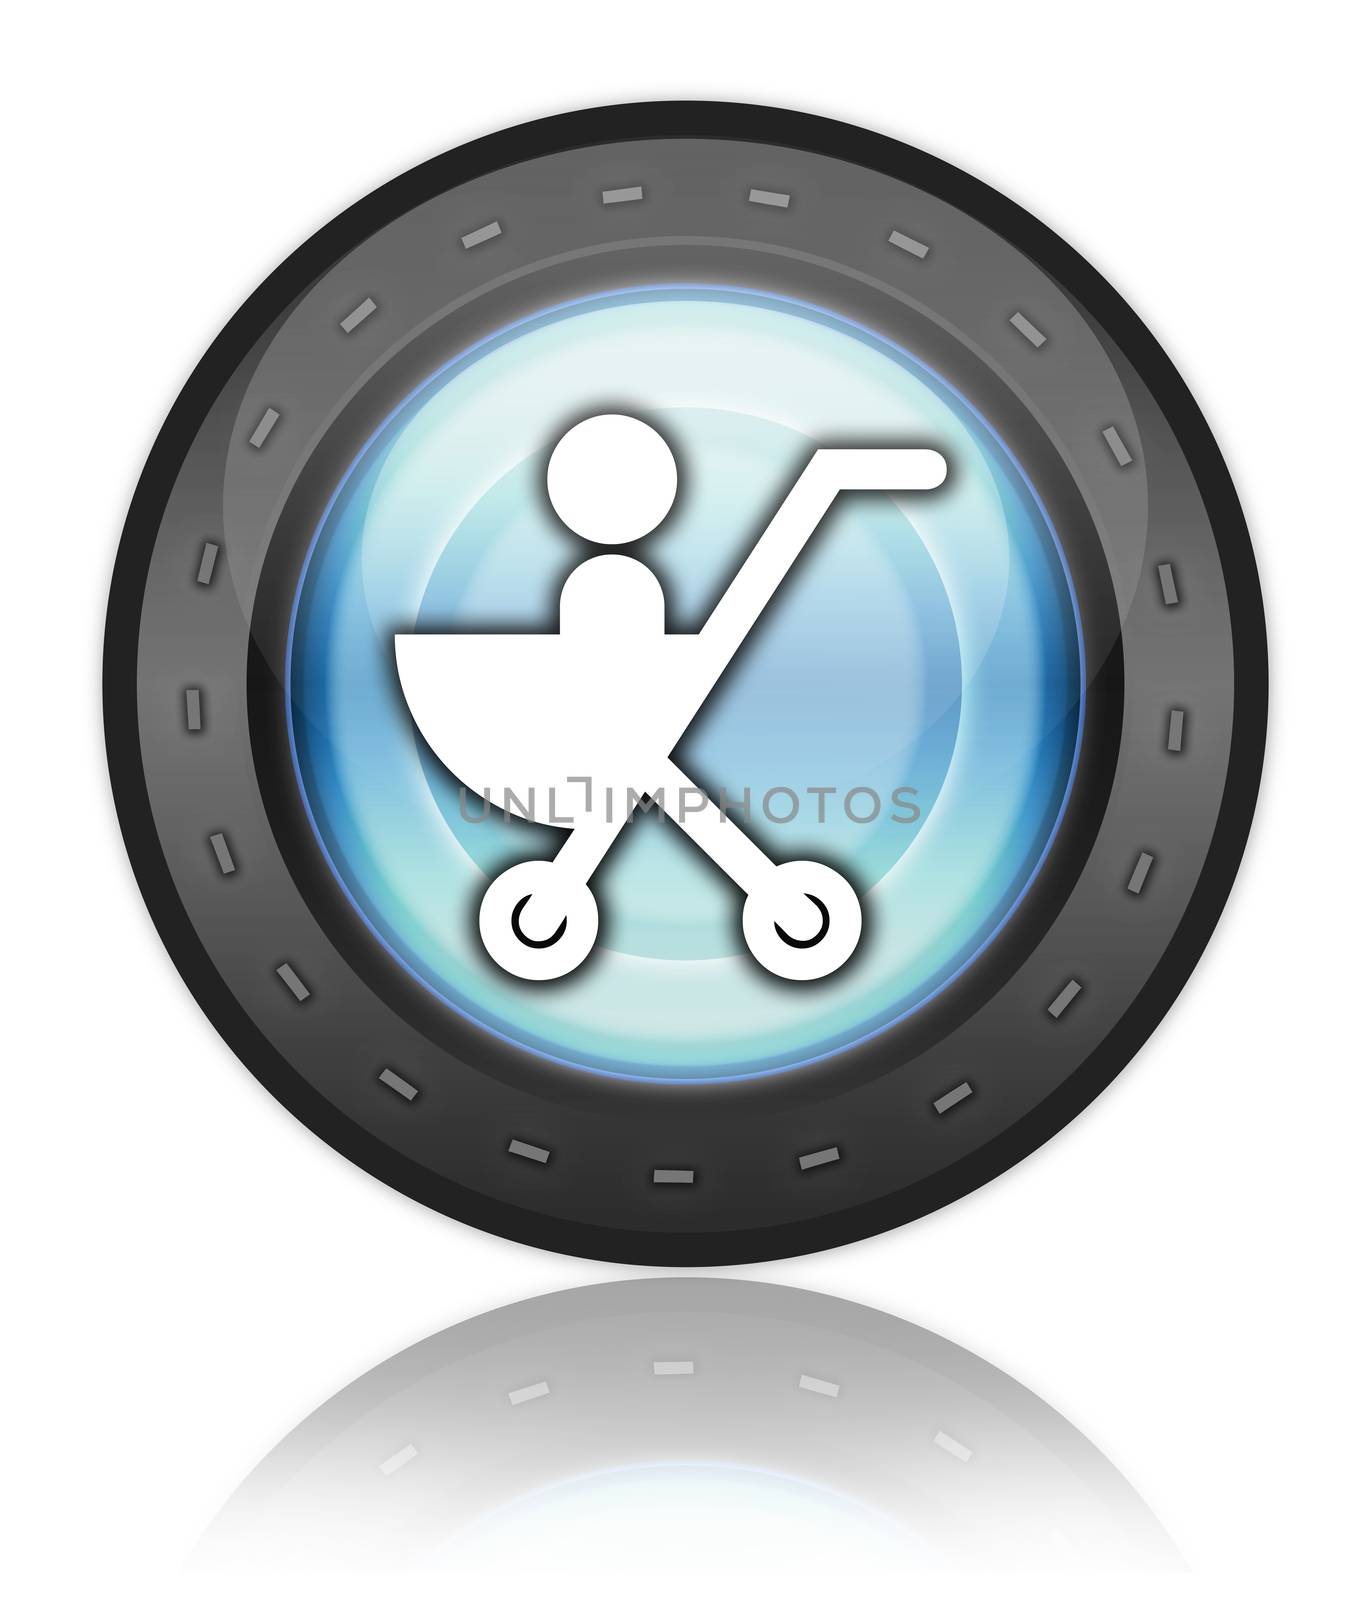 Icon, Button, Pictogram Stroller by mindscanner